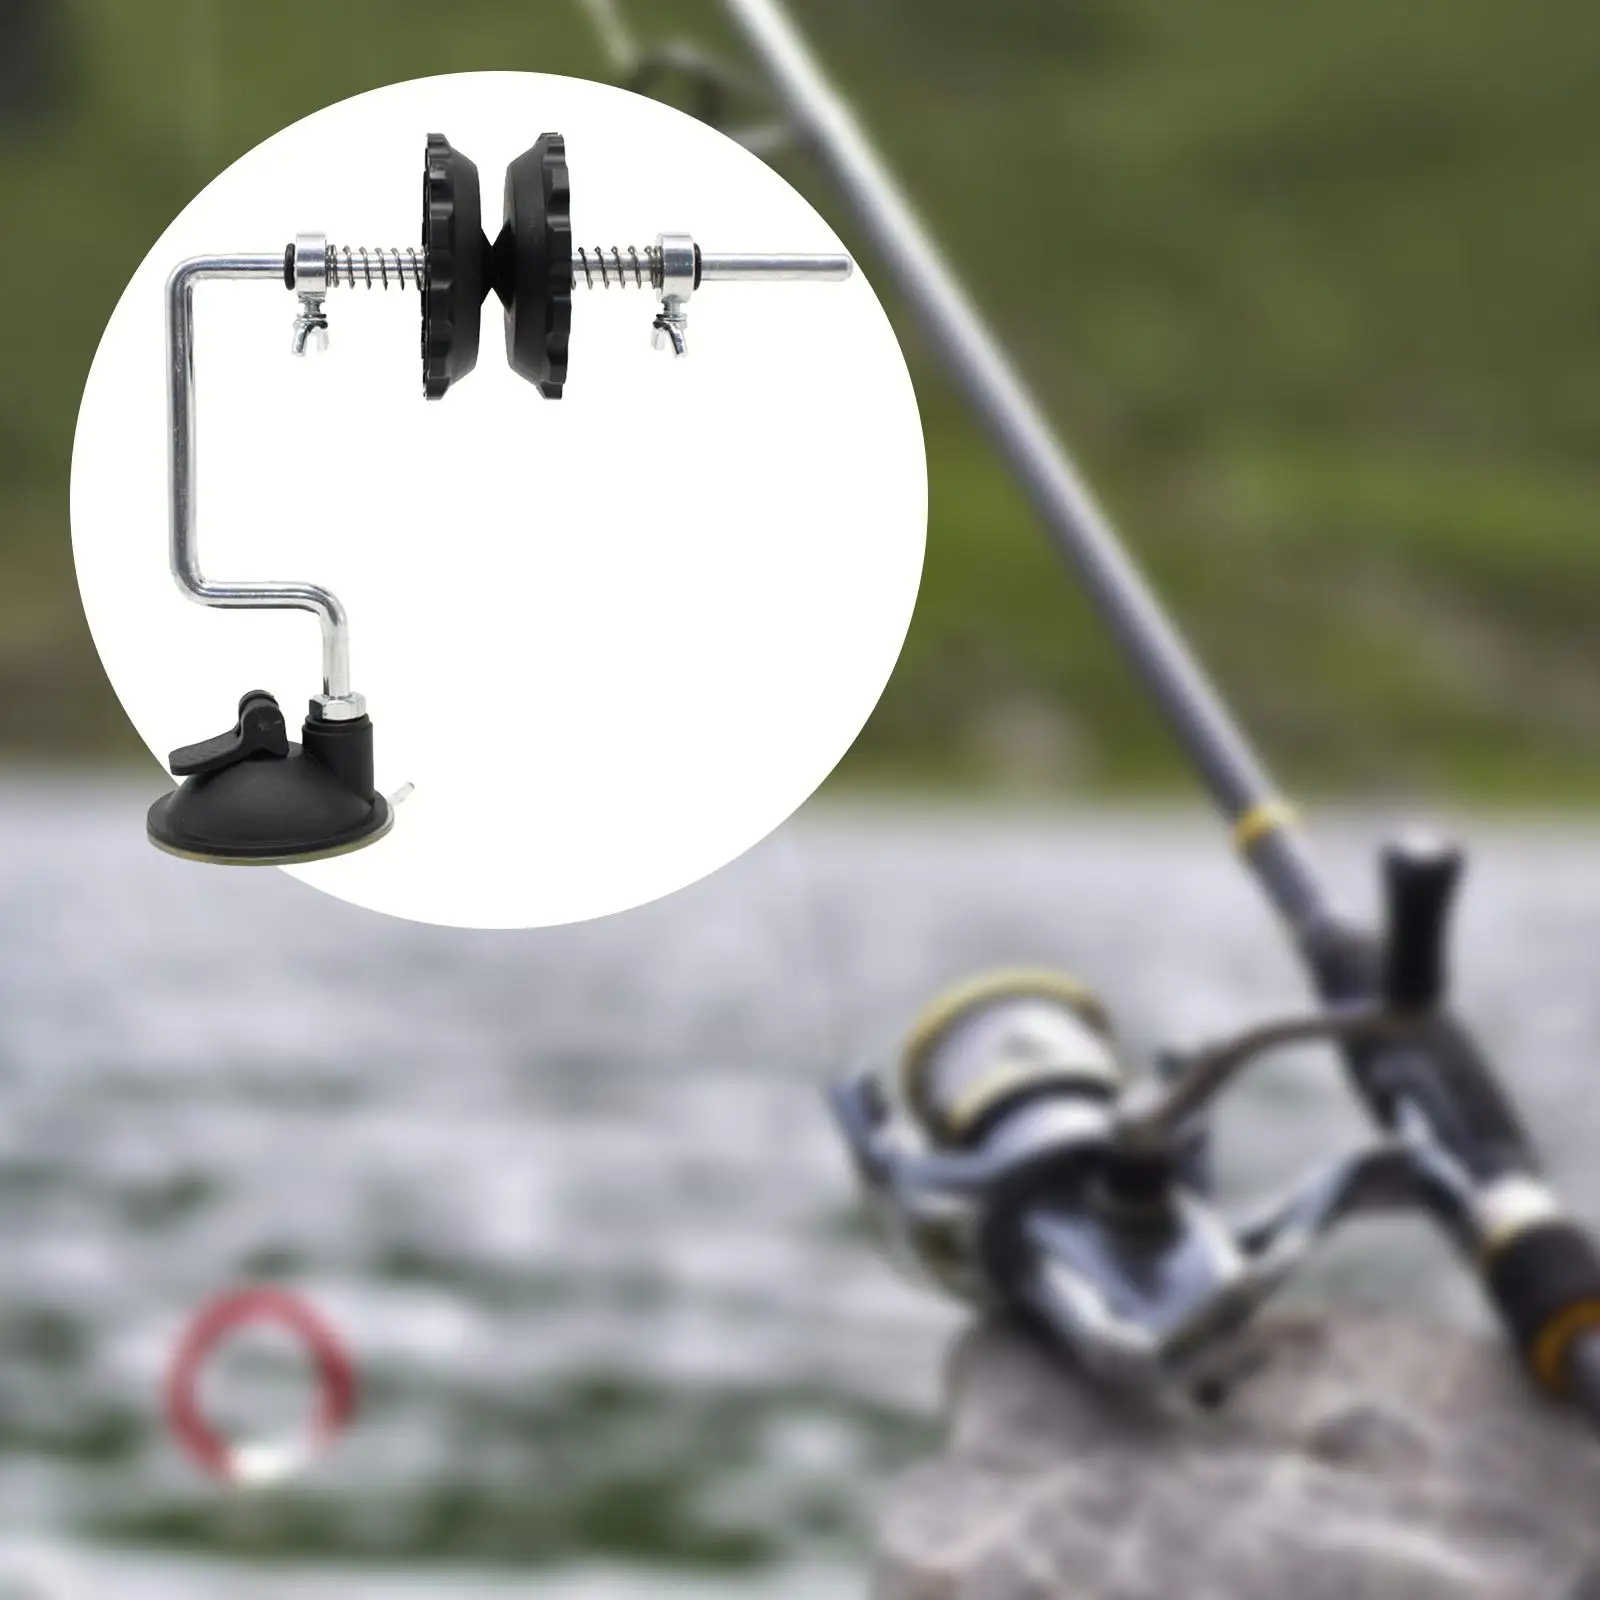 Fishing Line Spooler Winder Sturdy with Suction Cup Multipurpose Gadget Winder System Reel Holder for Boats Kayaks Fishing